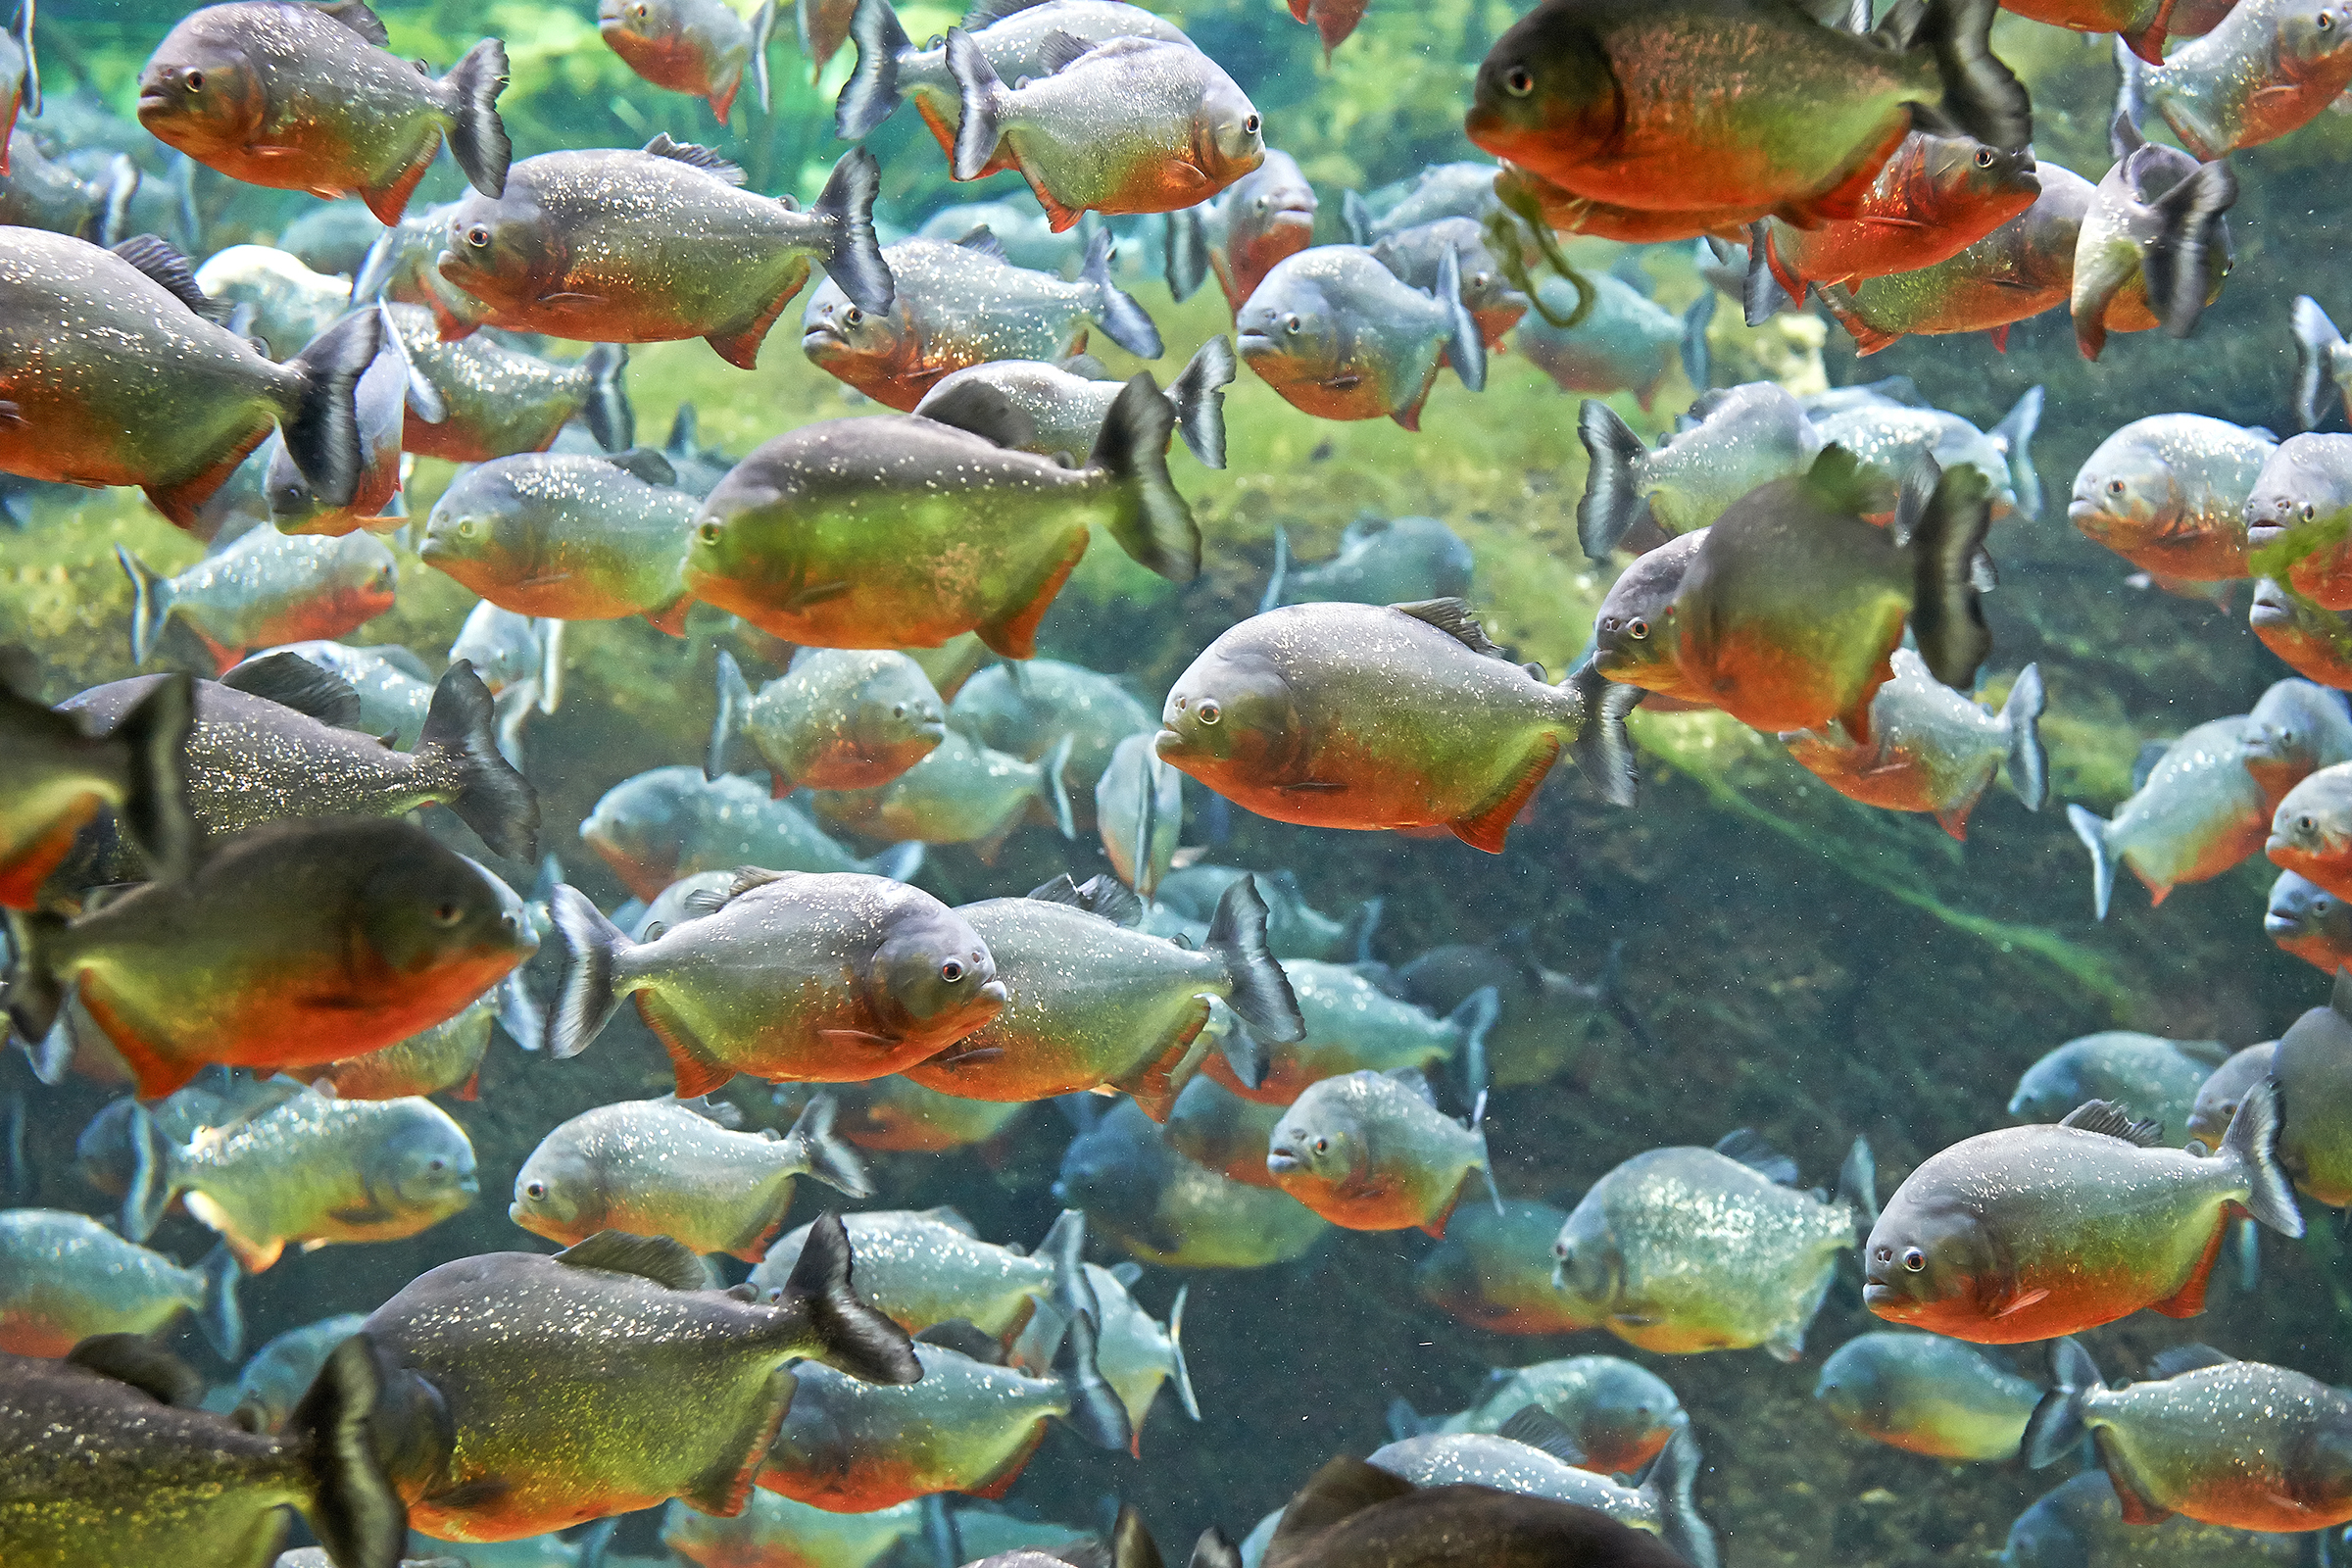 Could Piranha Really Turn You Into a Skeleton in a Matter of Minutes?